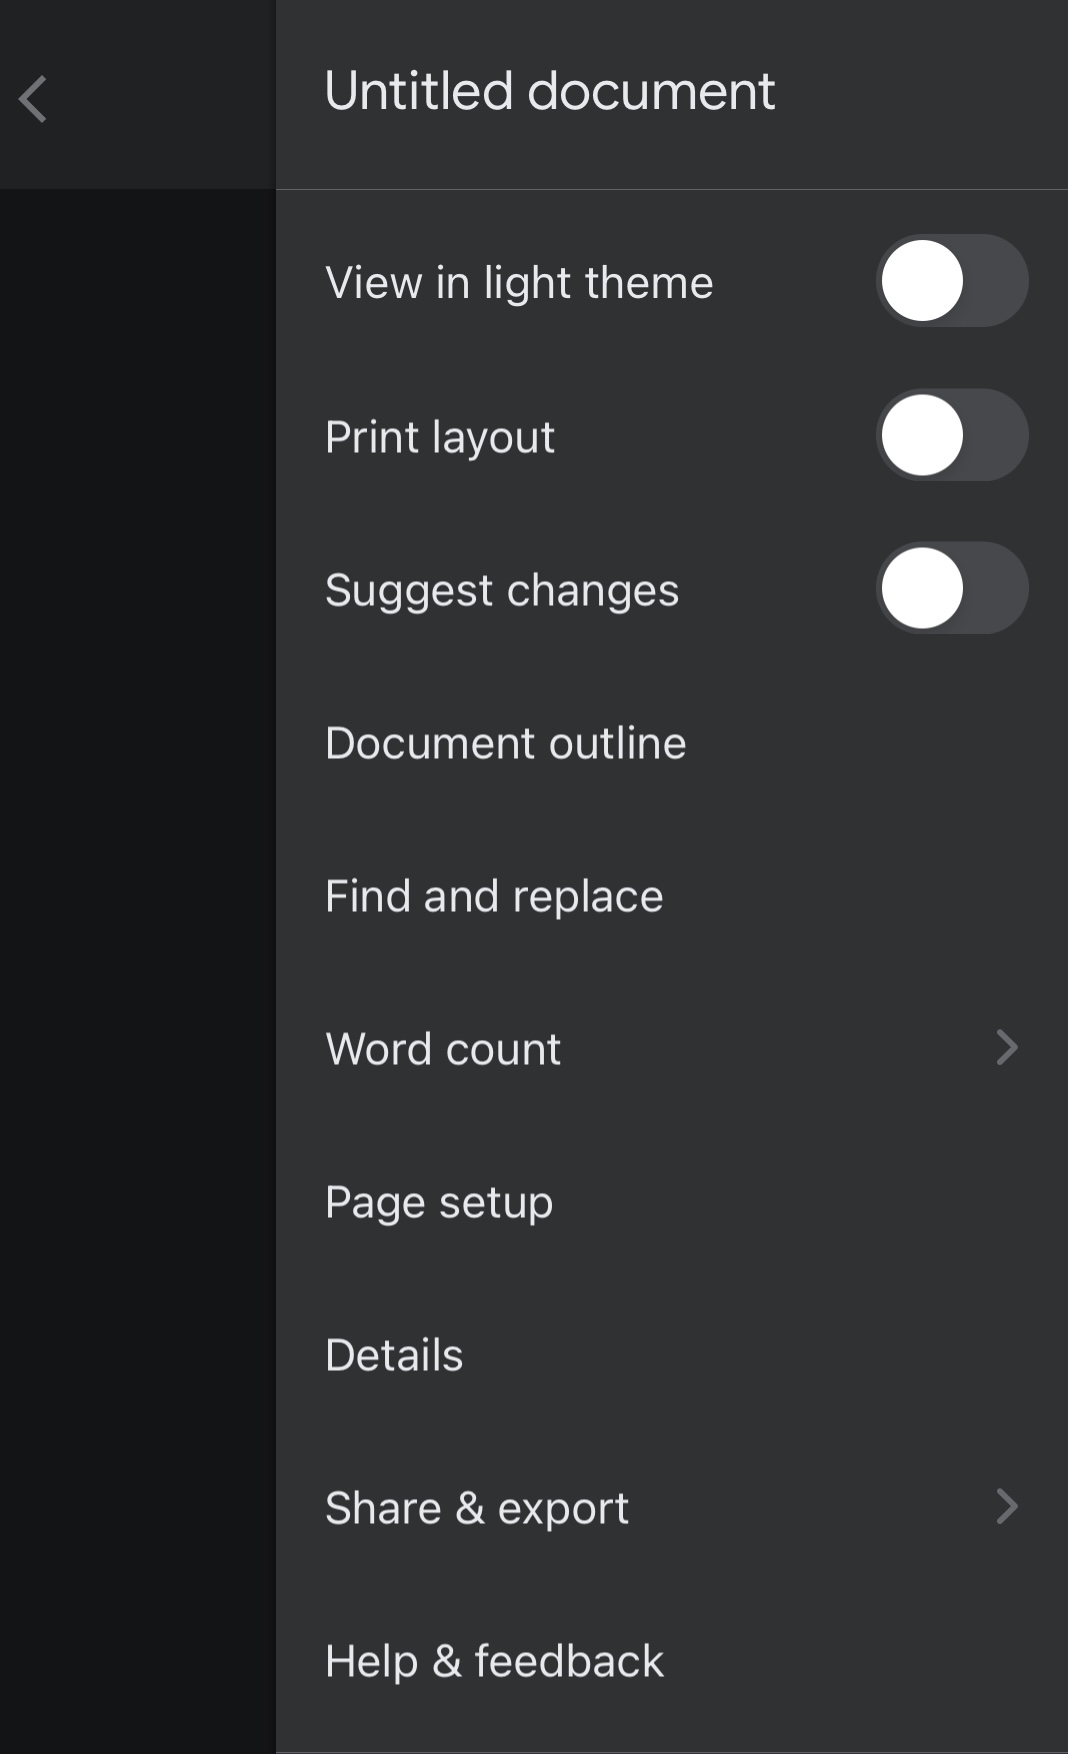 google doc settings showing share and export